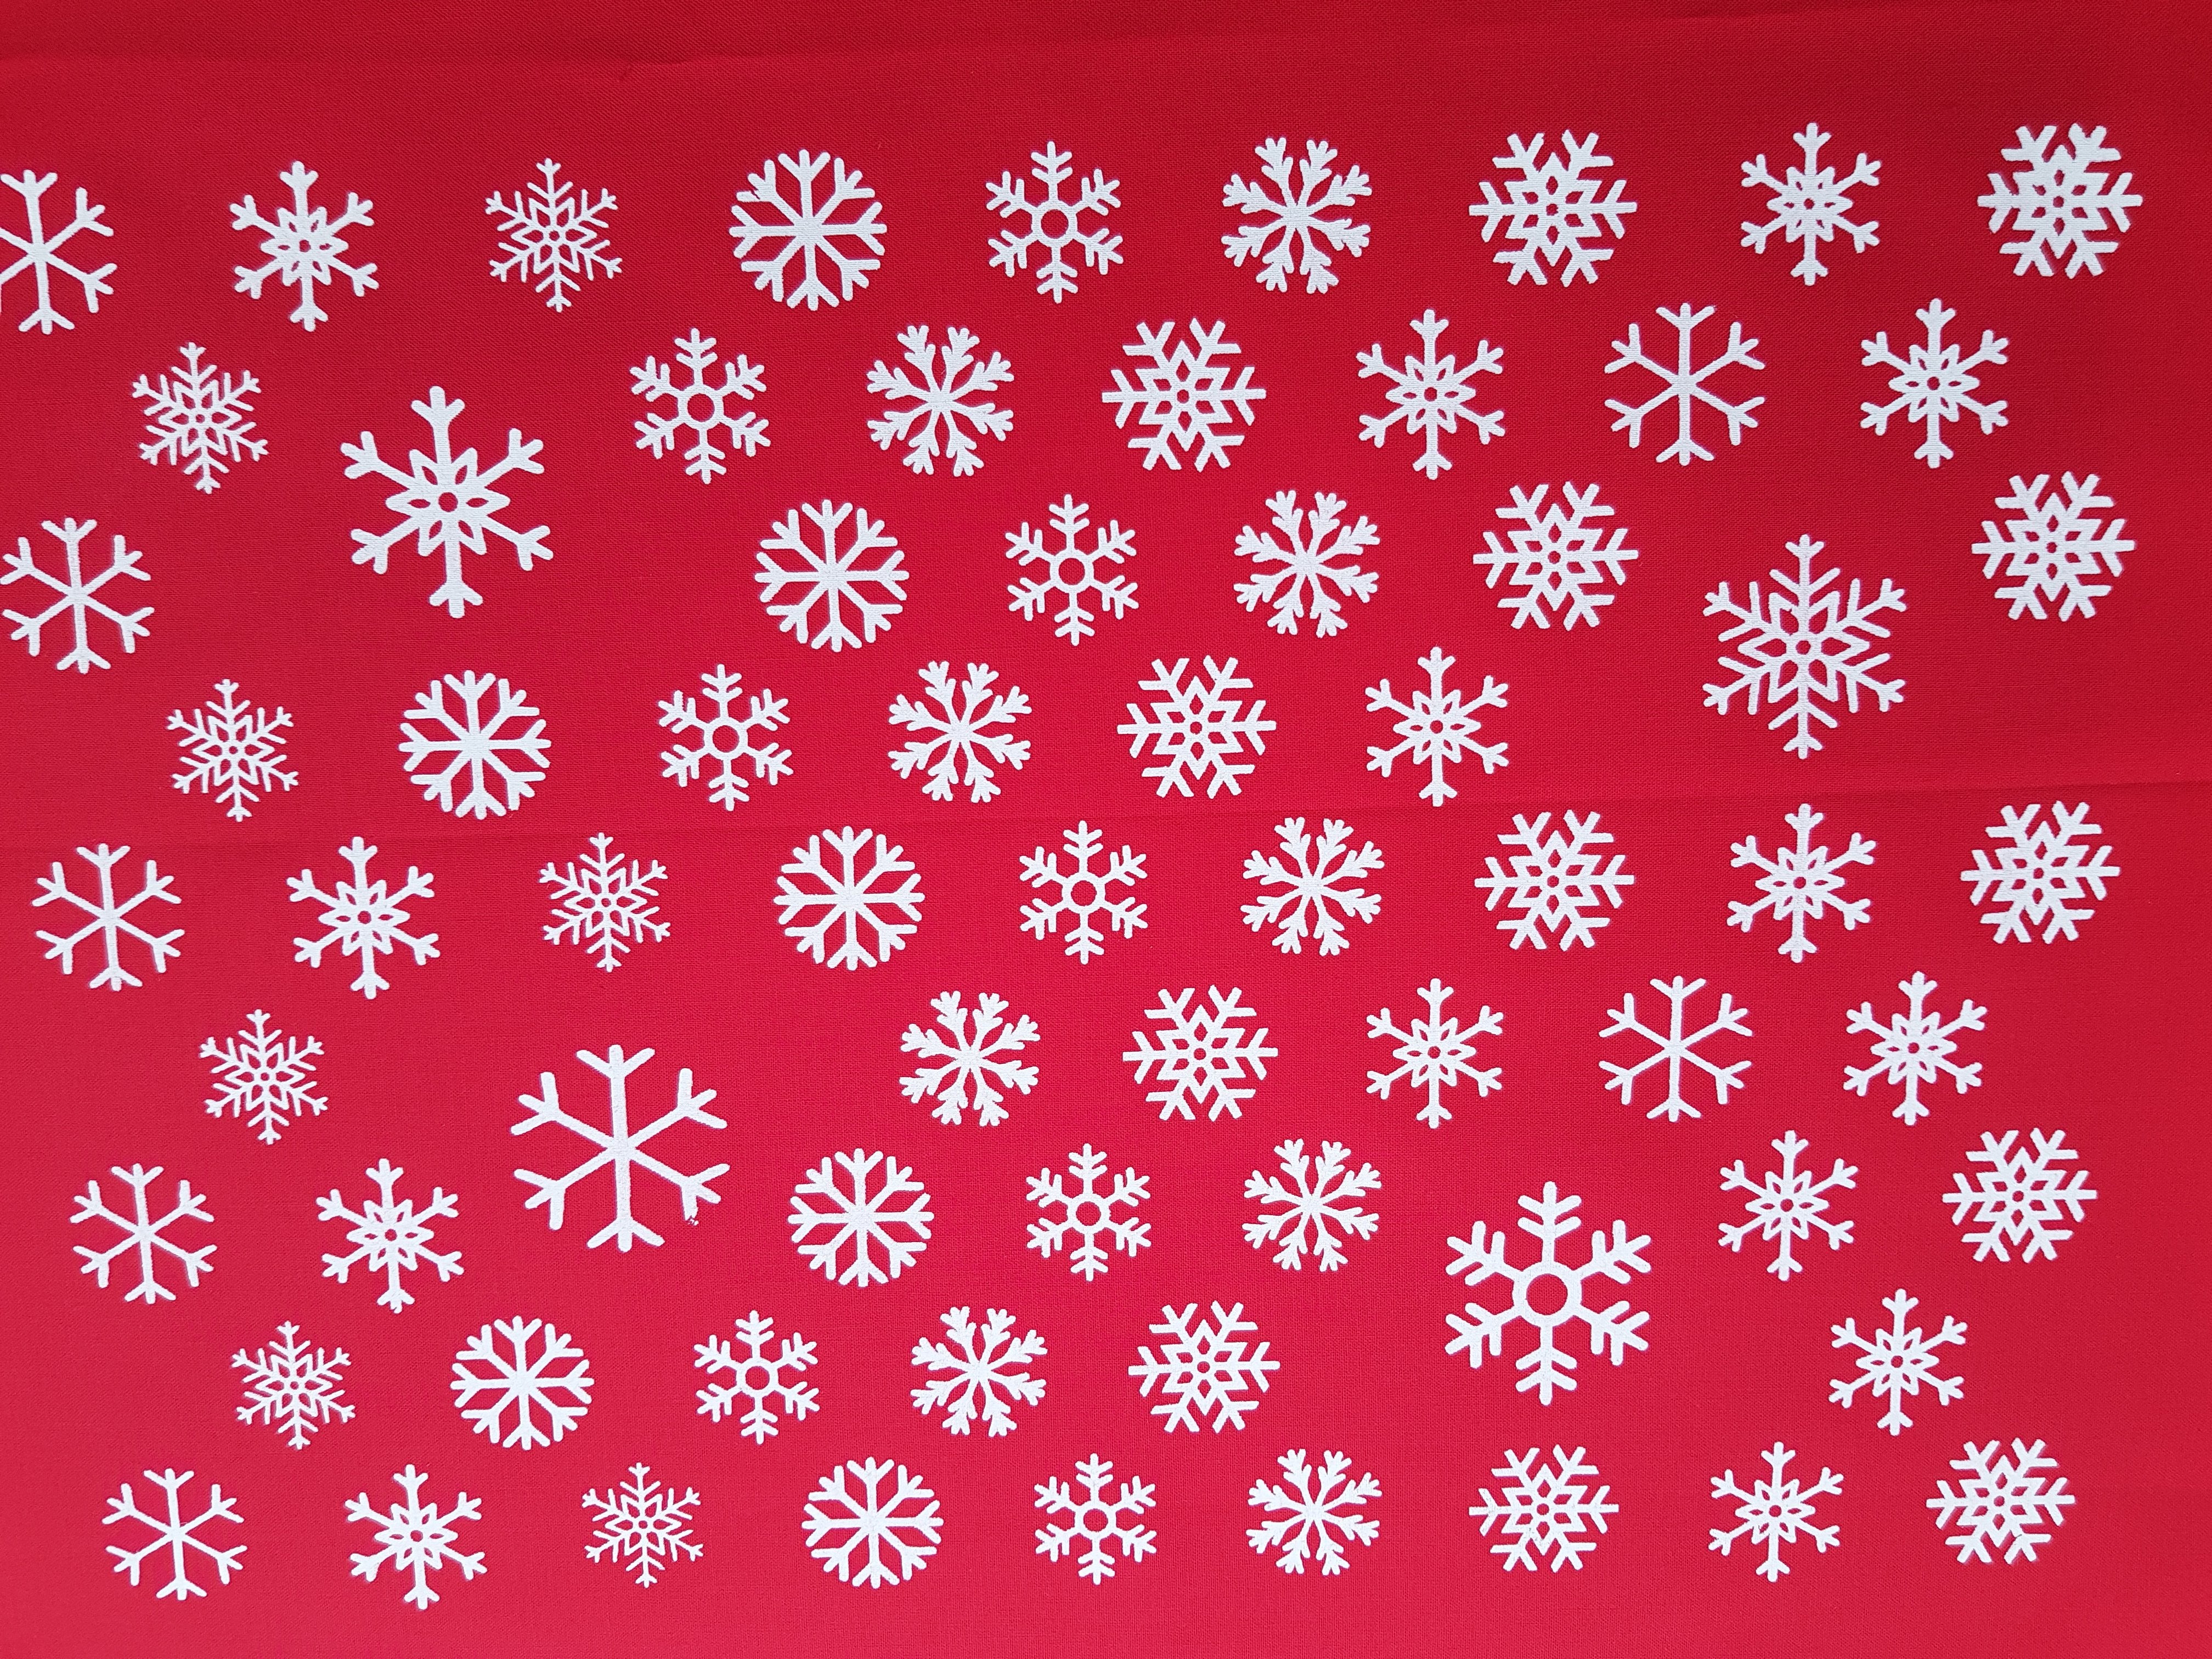 SNOWFLAKES - A Snowflake is not just for Christmas - Screen Printed Snowflakes - Kona Cotton Panel